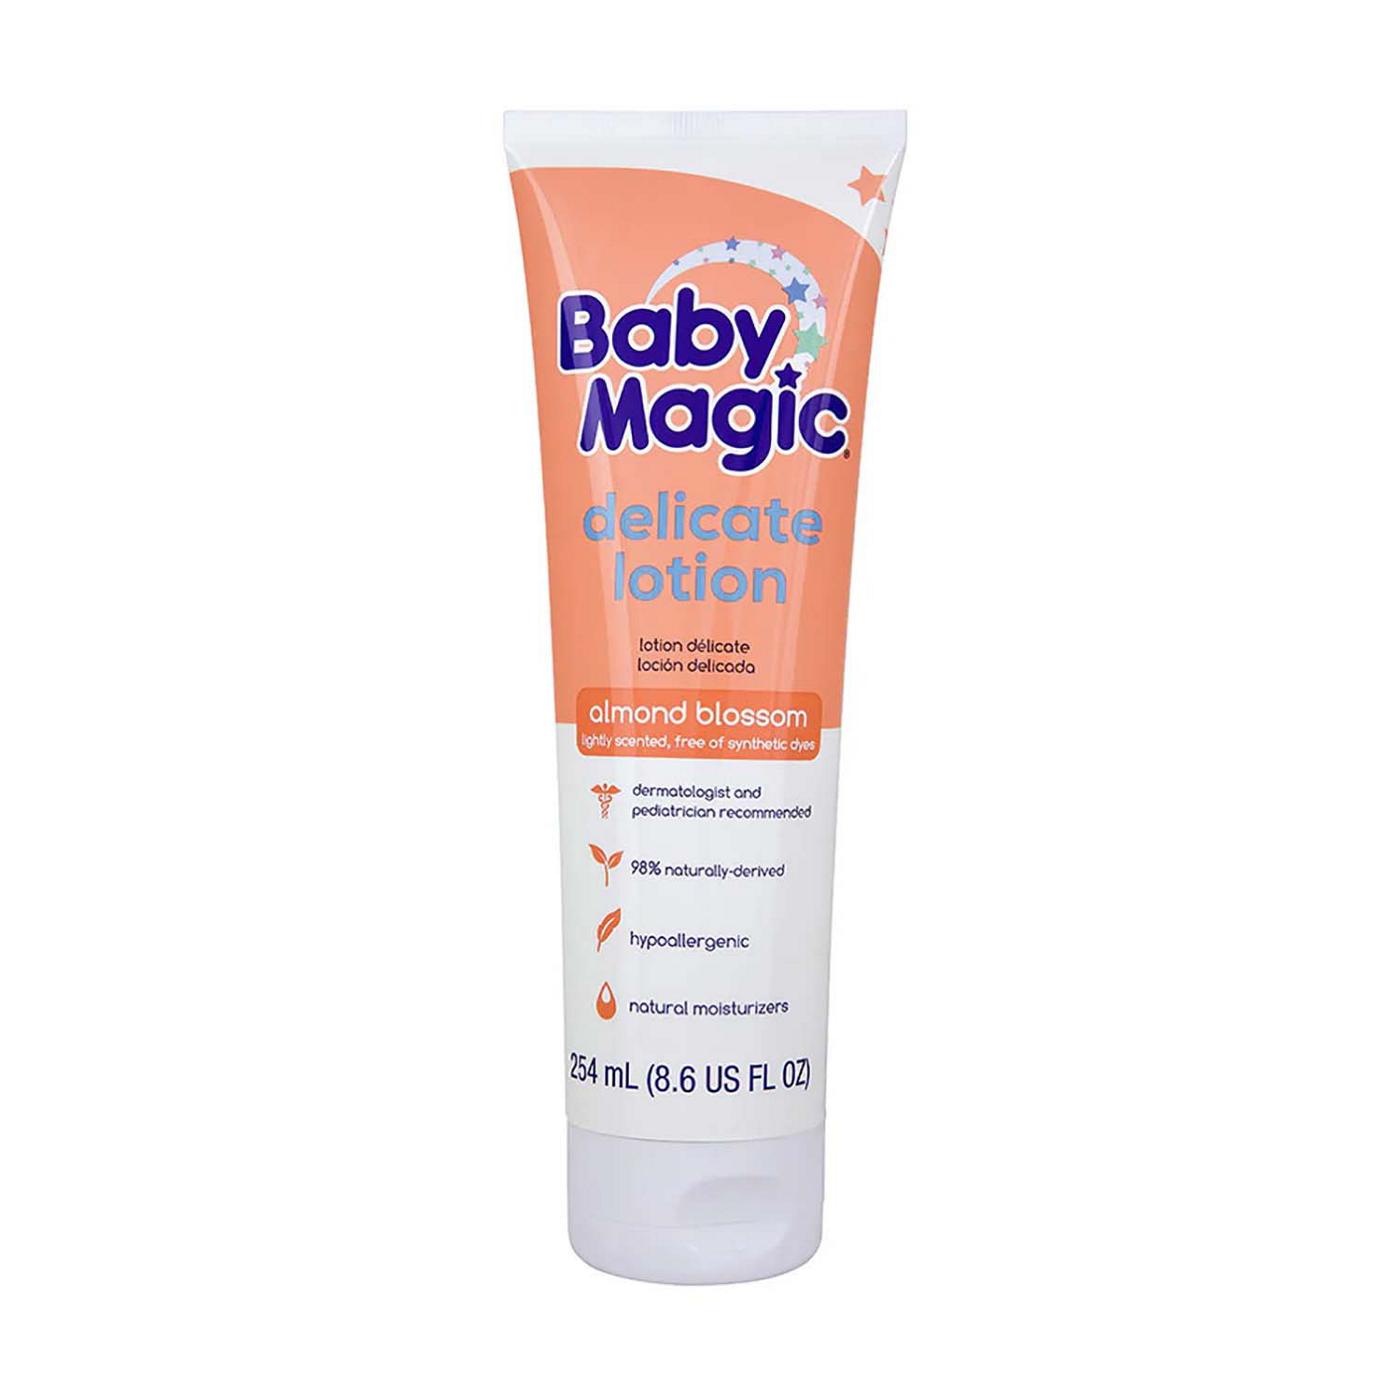 Baby Magic Delicate Lotion - Almond Blossom; image 1 of 2